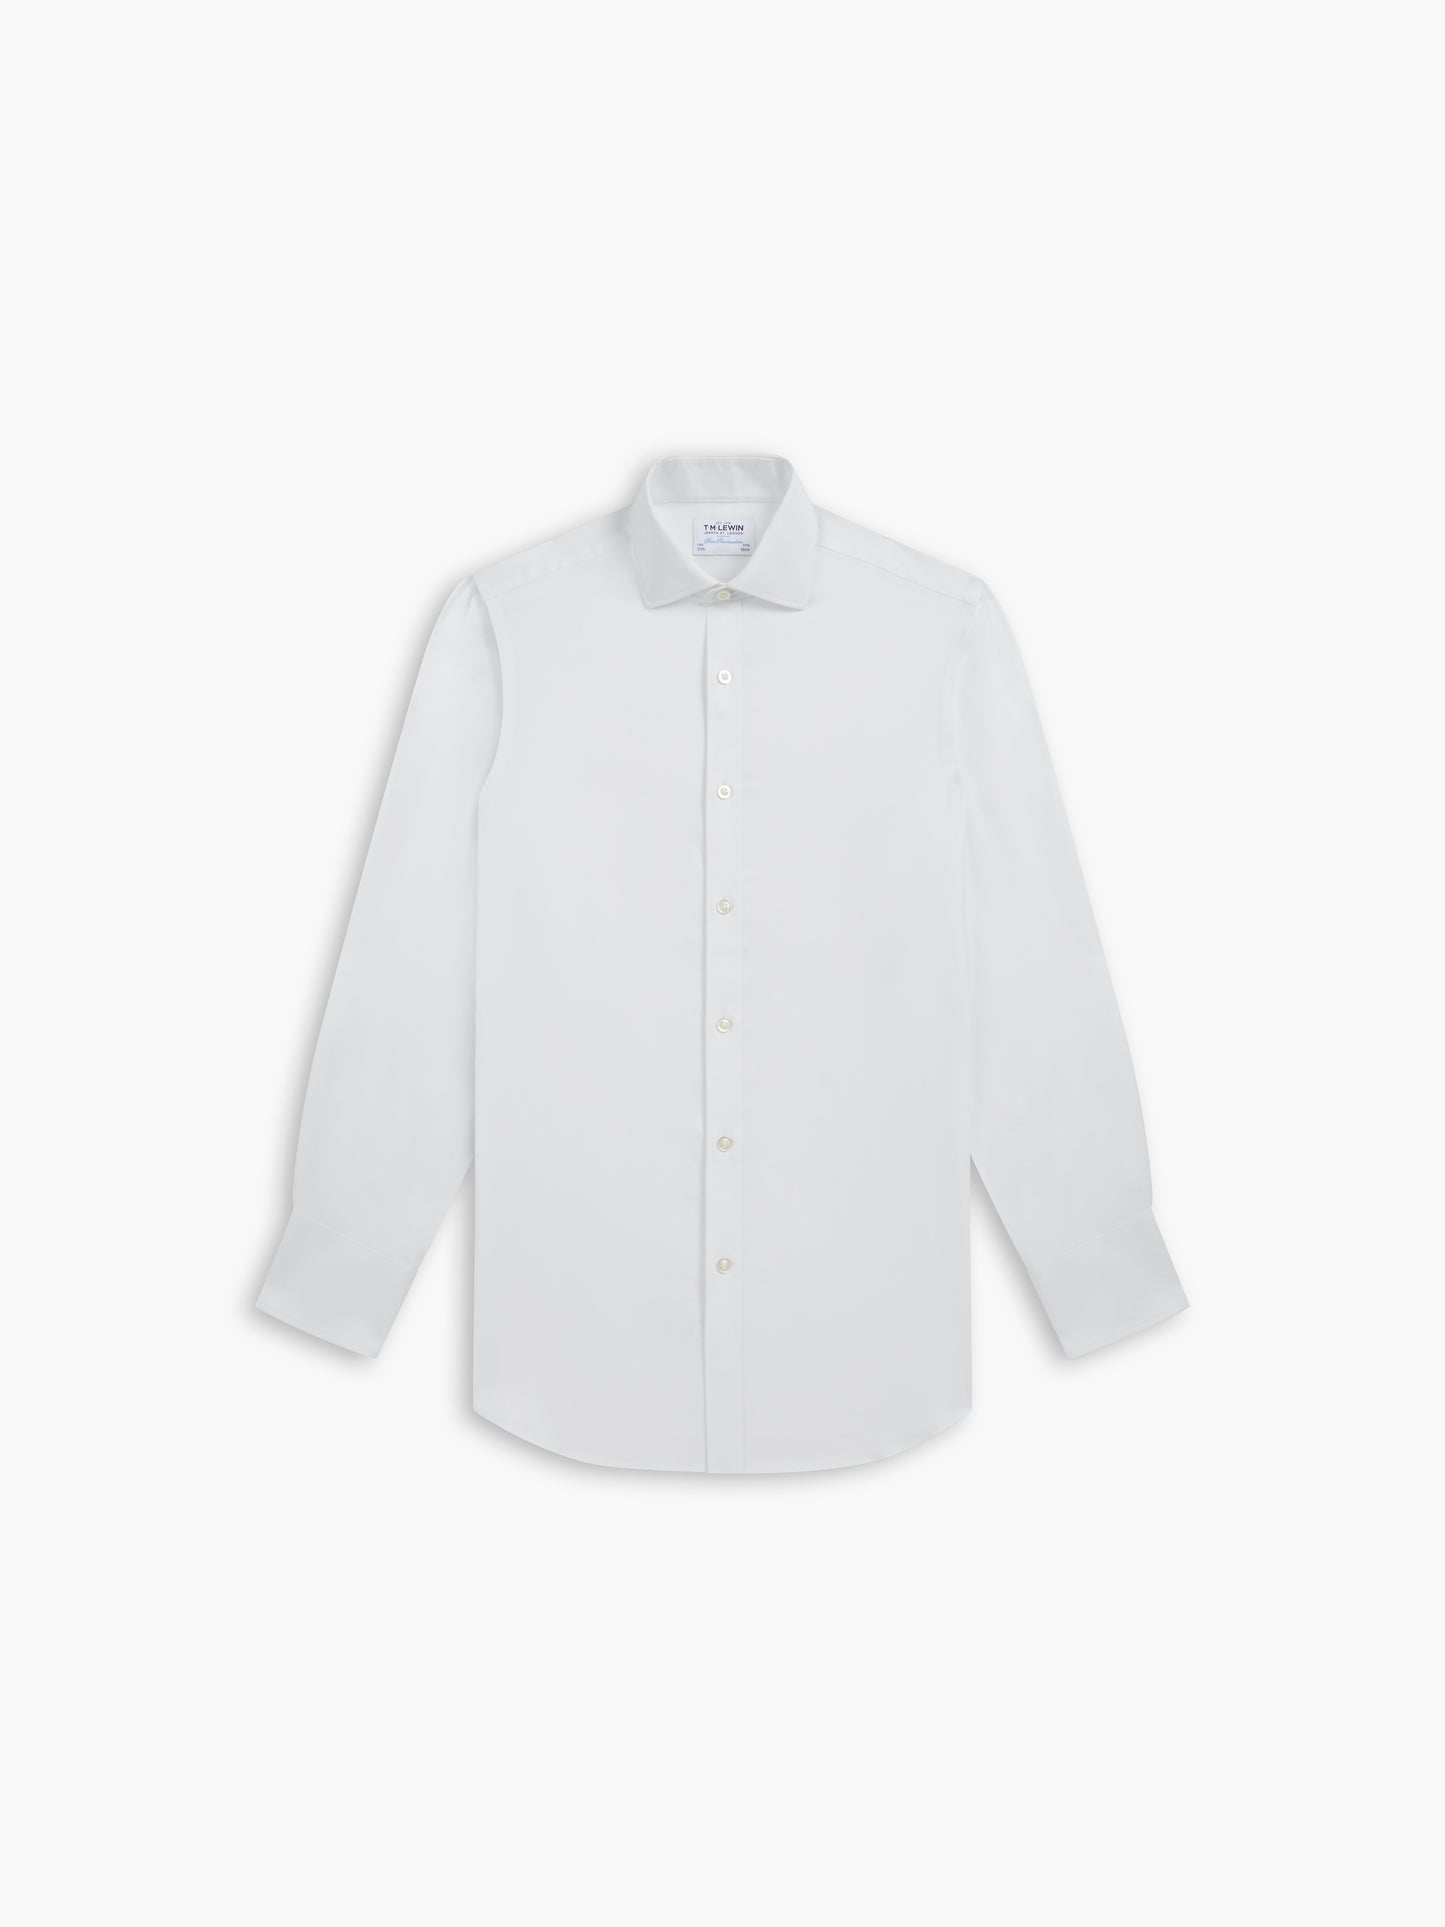 Non-Iron White Royal Oxford Fitted Single Cuff Classic Collar Shirt